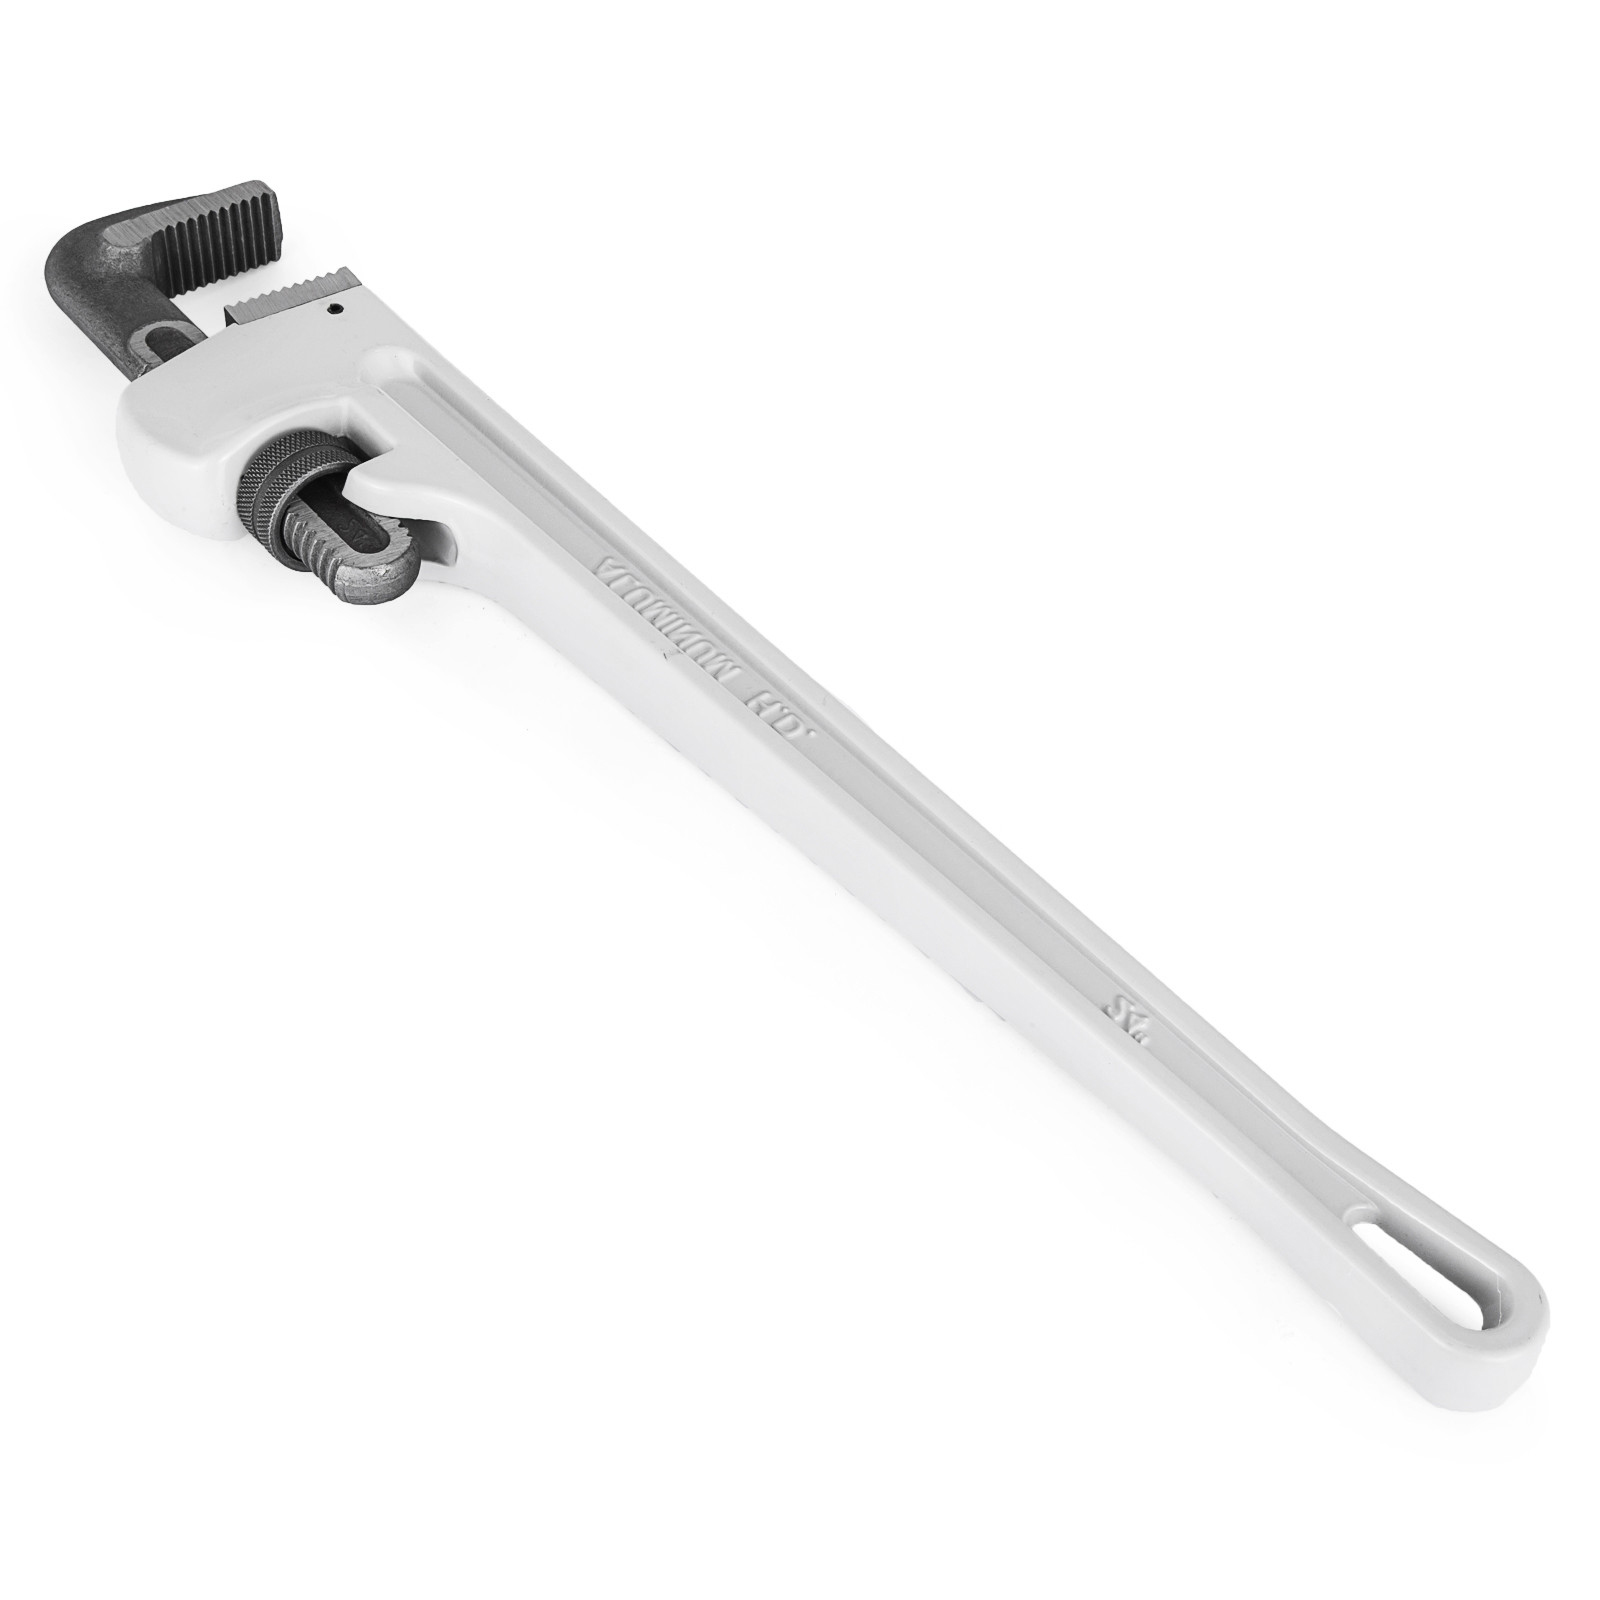 Pipe Wrench 24in. Aluminum Straight Pipe Wrench Heat Treated Jaw 3 In. Capacity от Vevor Many GEOs